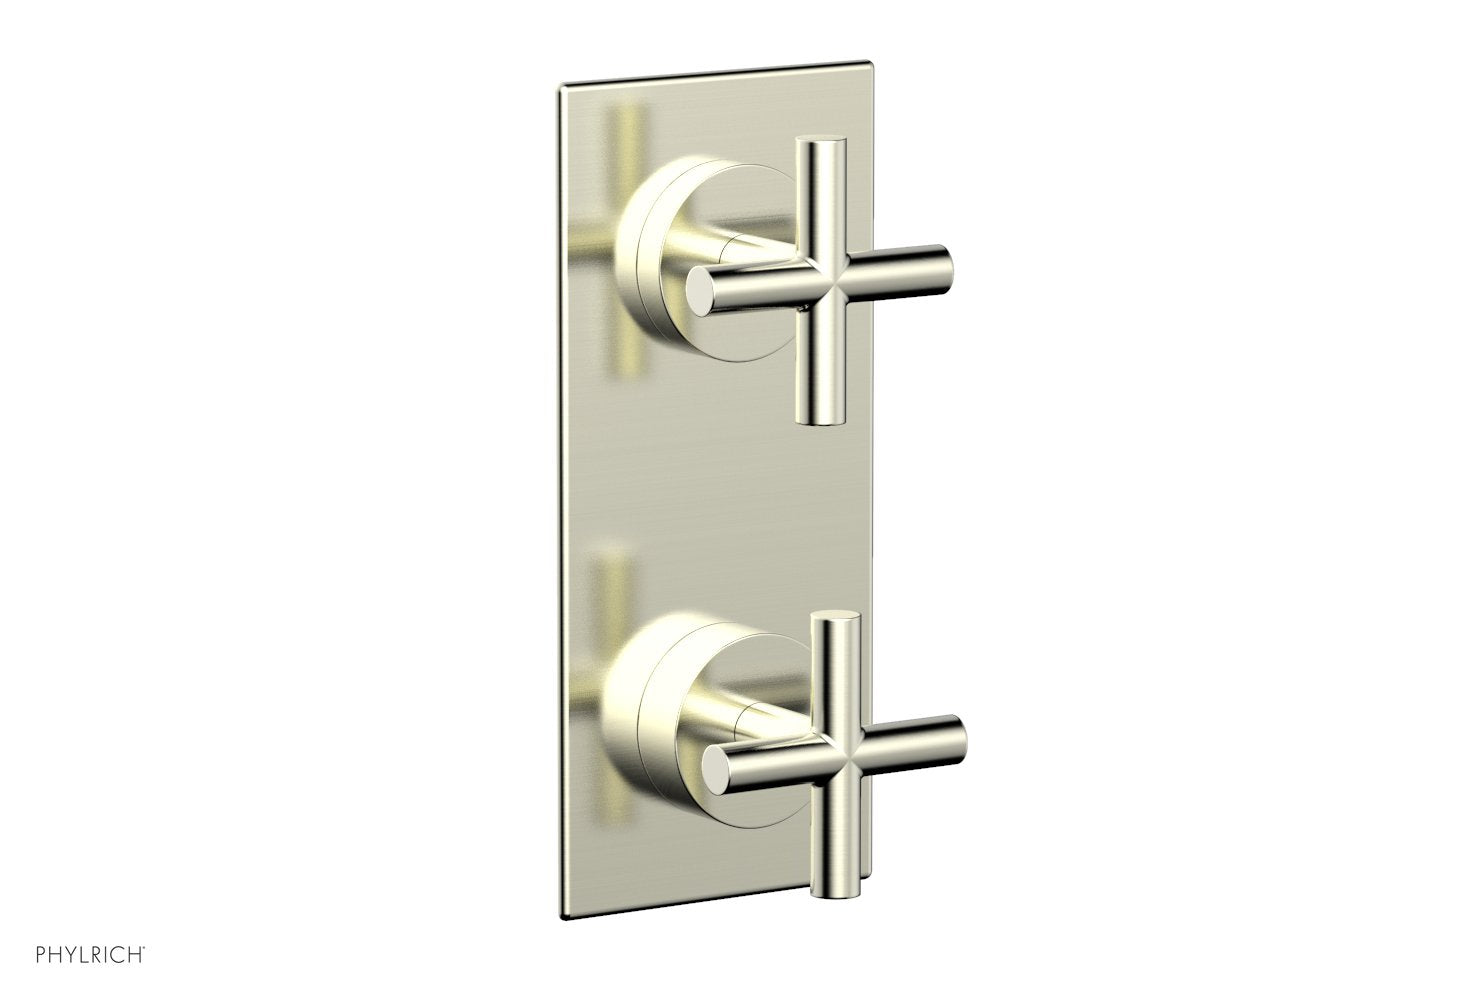 Phylrich TRANSITION 3/4" Thermostatic Valve with Volume Control or Diverter, Cross Handles